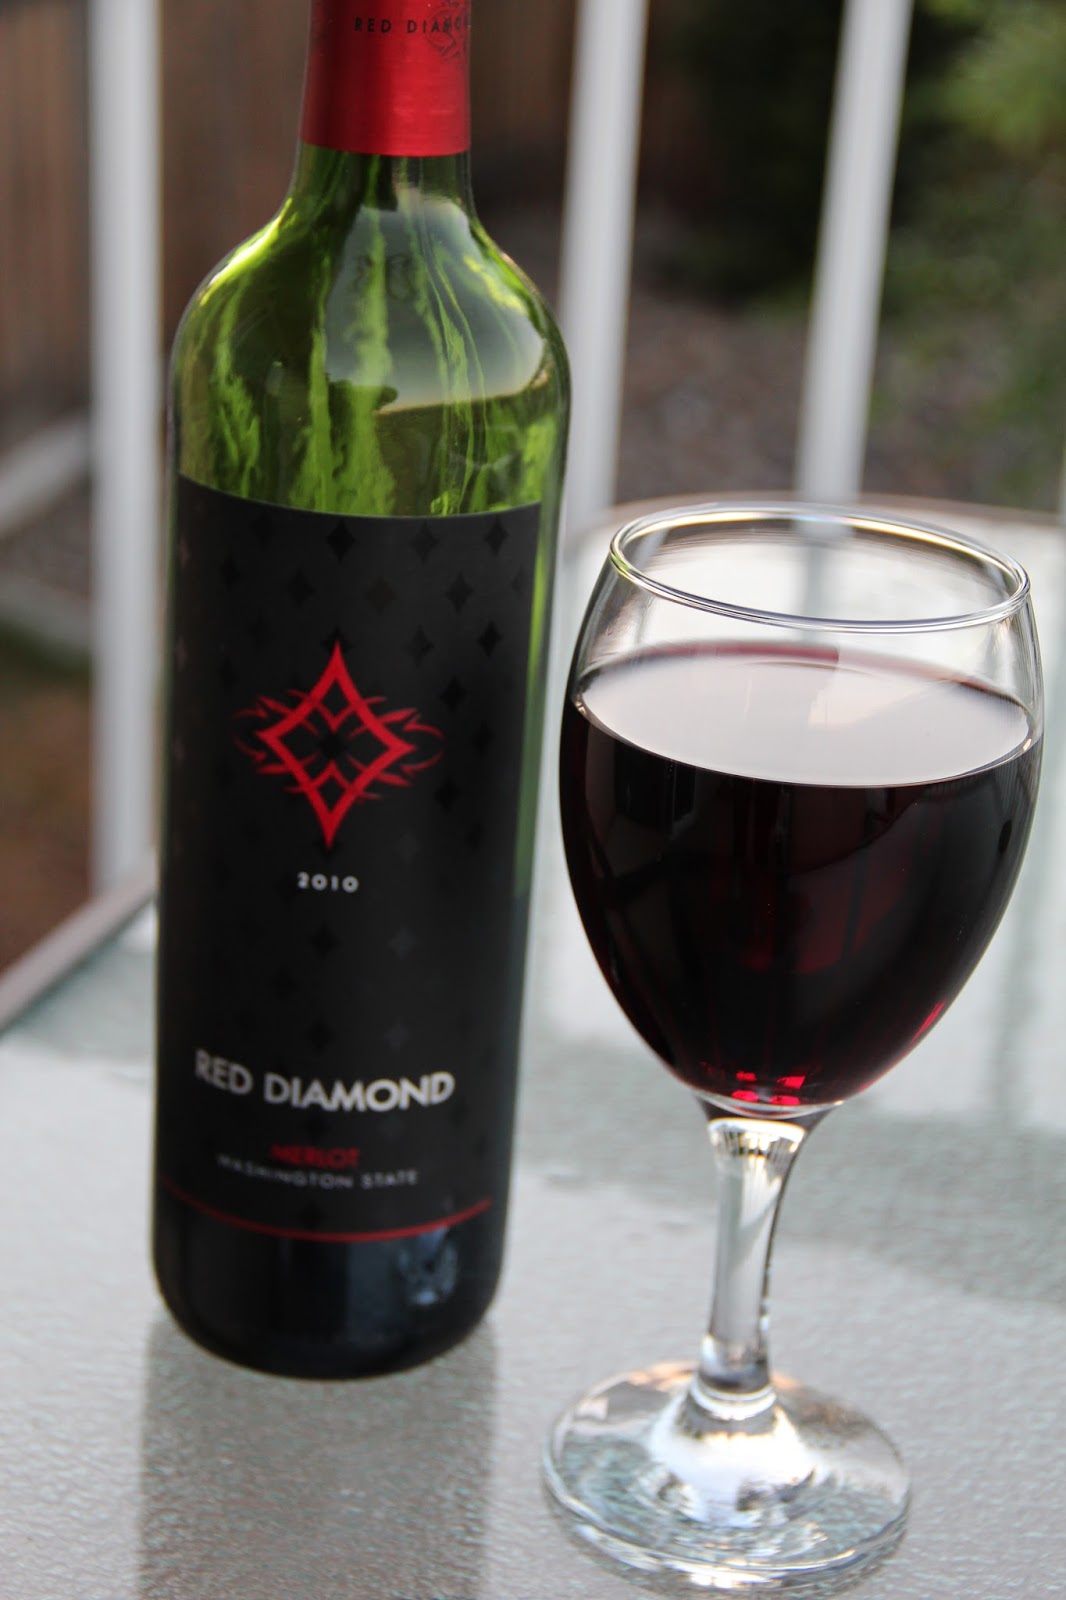 Moments Don't Collect Dust Wine Wednesday Red Diamond Merlot